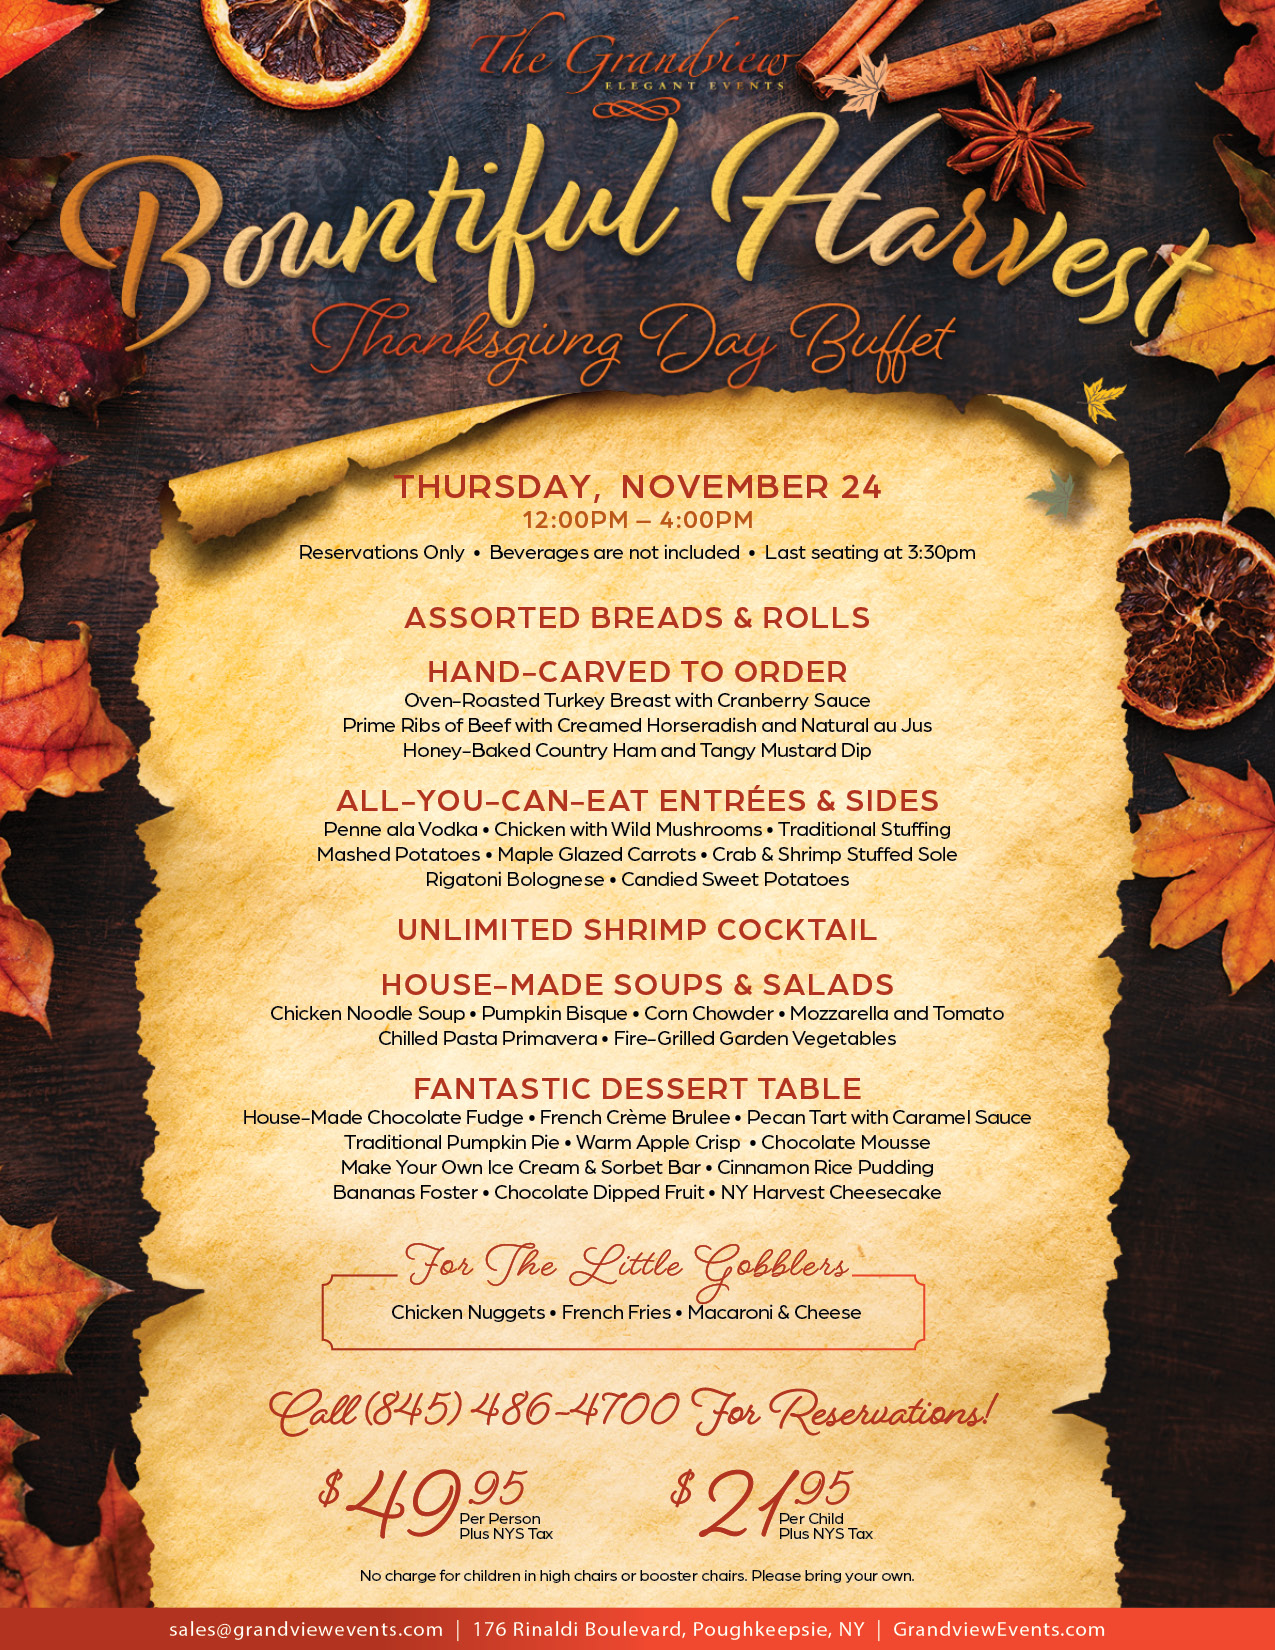 Thanksgiving Day Buffet - The Grandview